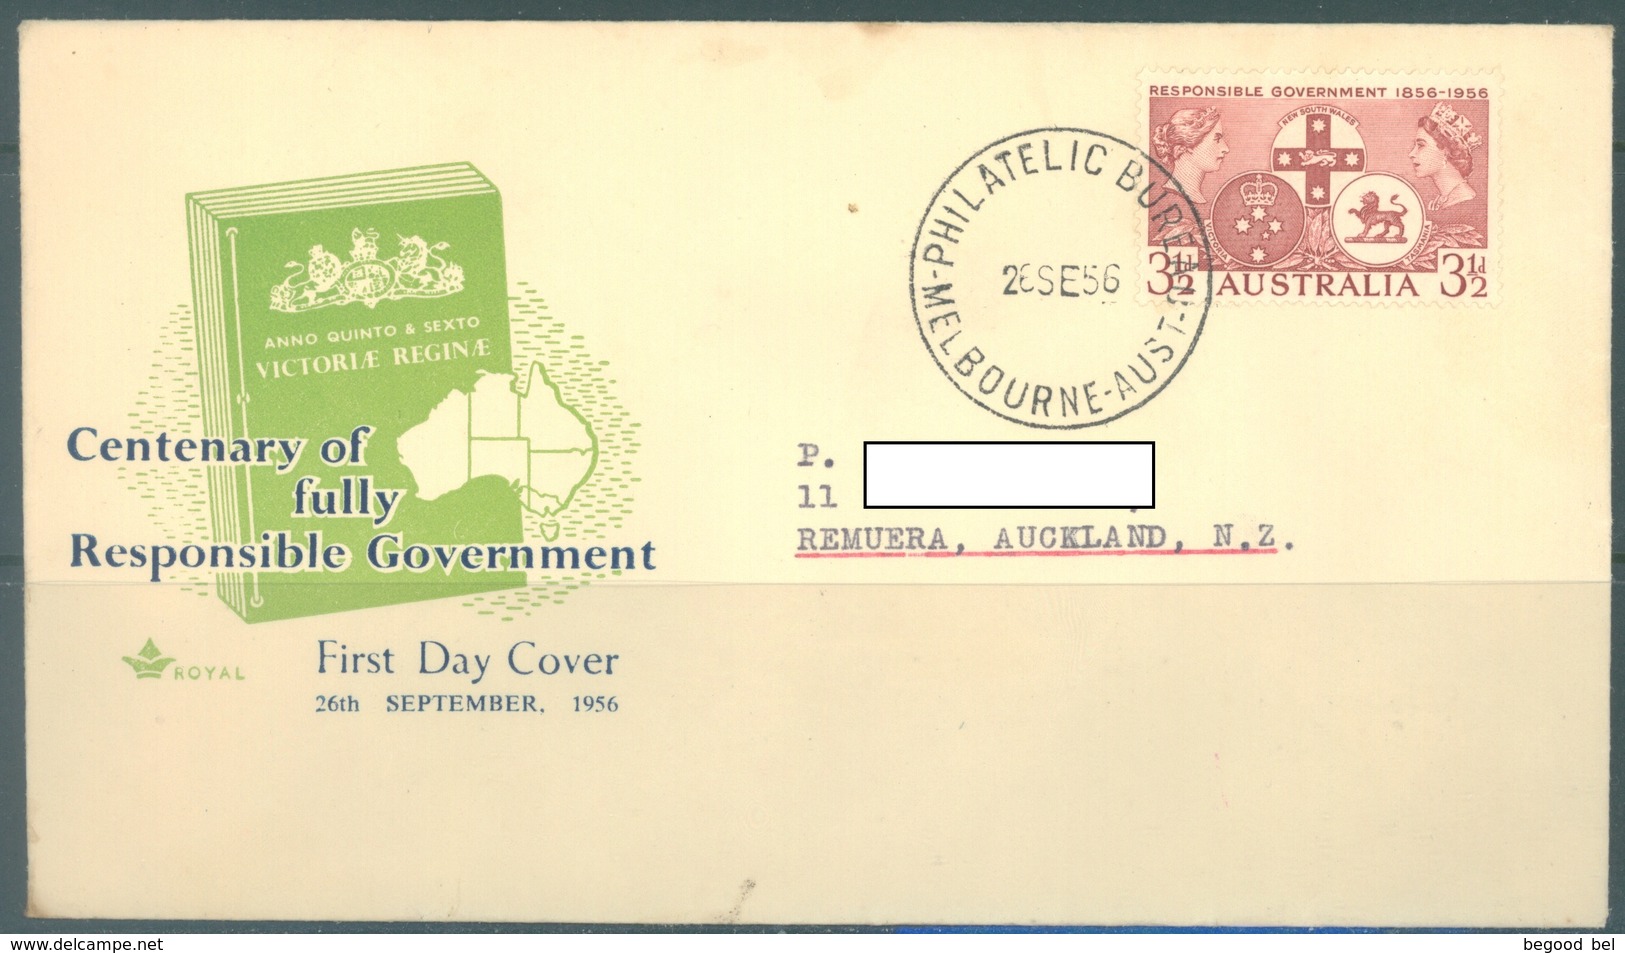 AUSTRALIA -  FDC  - 26.9.1956 - CENTENARY OF FULLY RESPONSIBLE GOVERNMENT - Yv 230  - Lot 19384 - Premiers Jours (FDC)